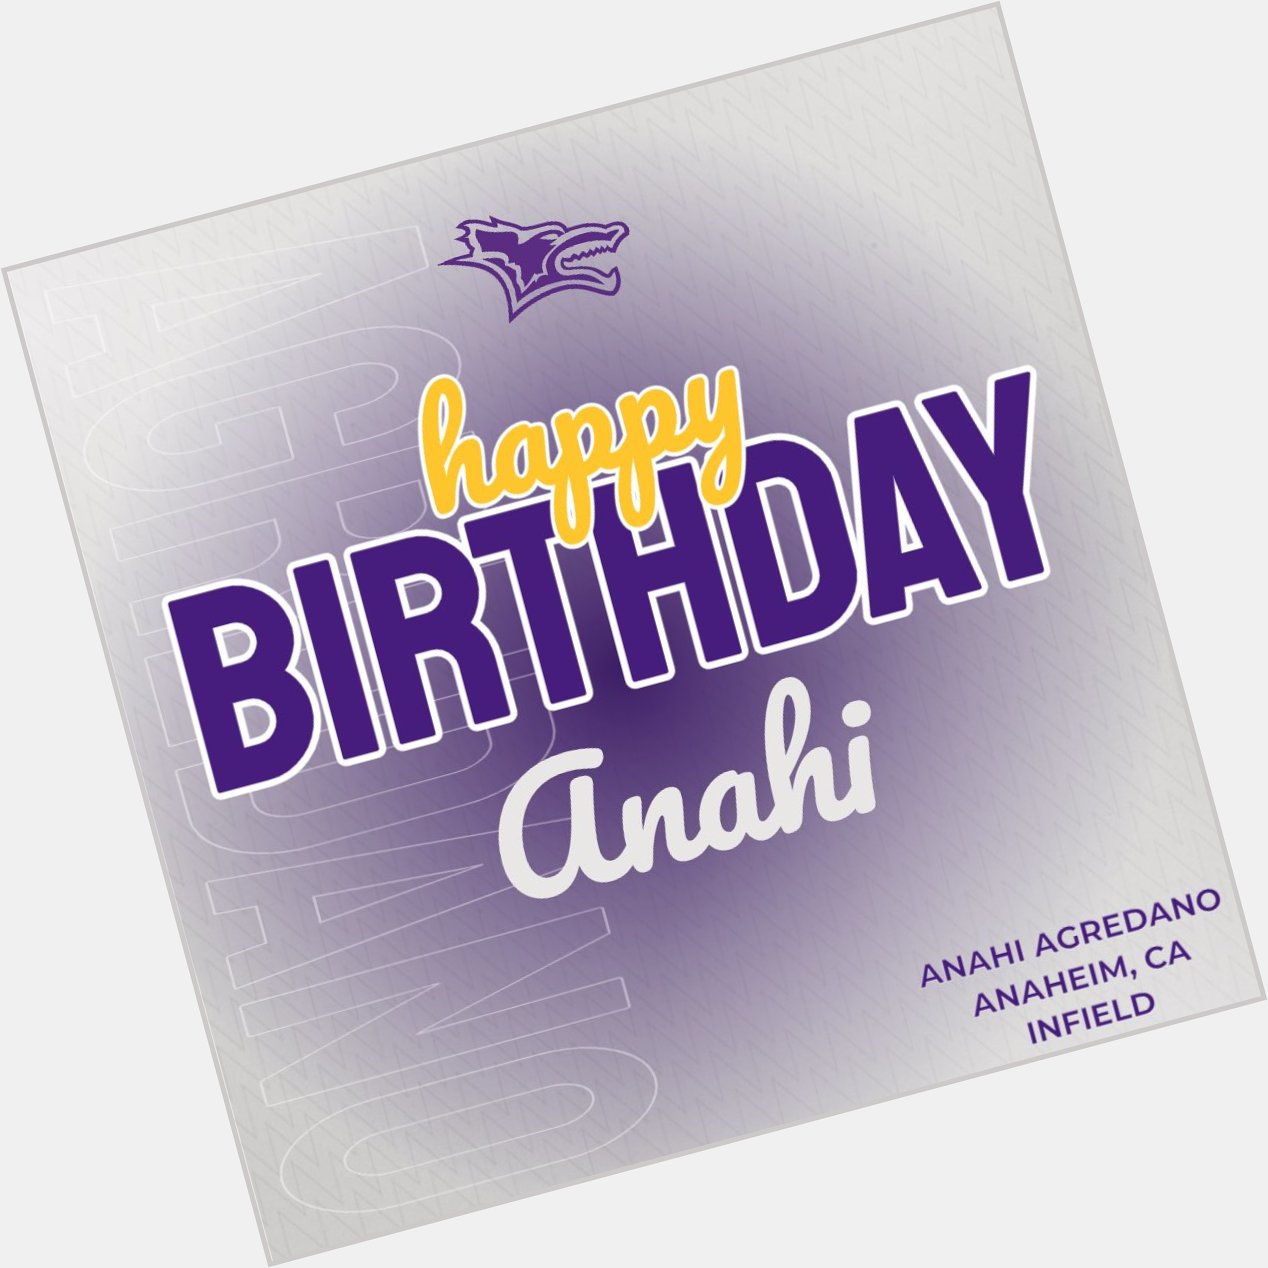 Happy birthday to our girl, Anahi We hope you have the best day out in Cali 